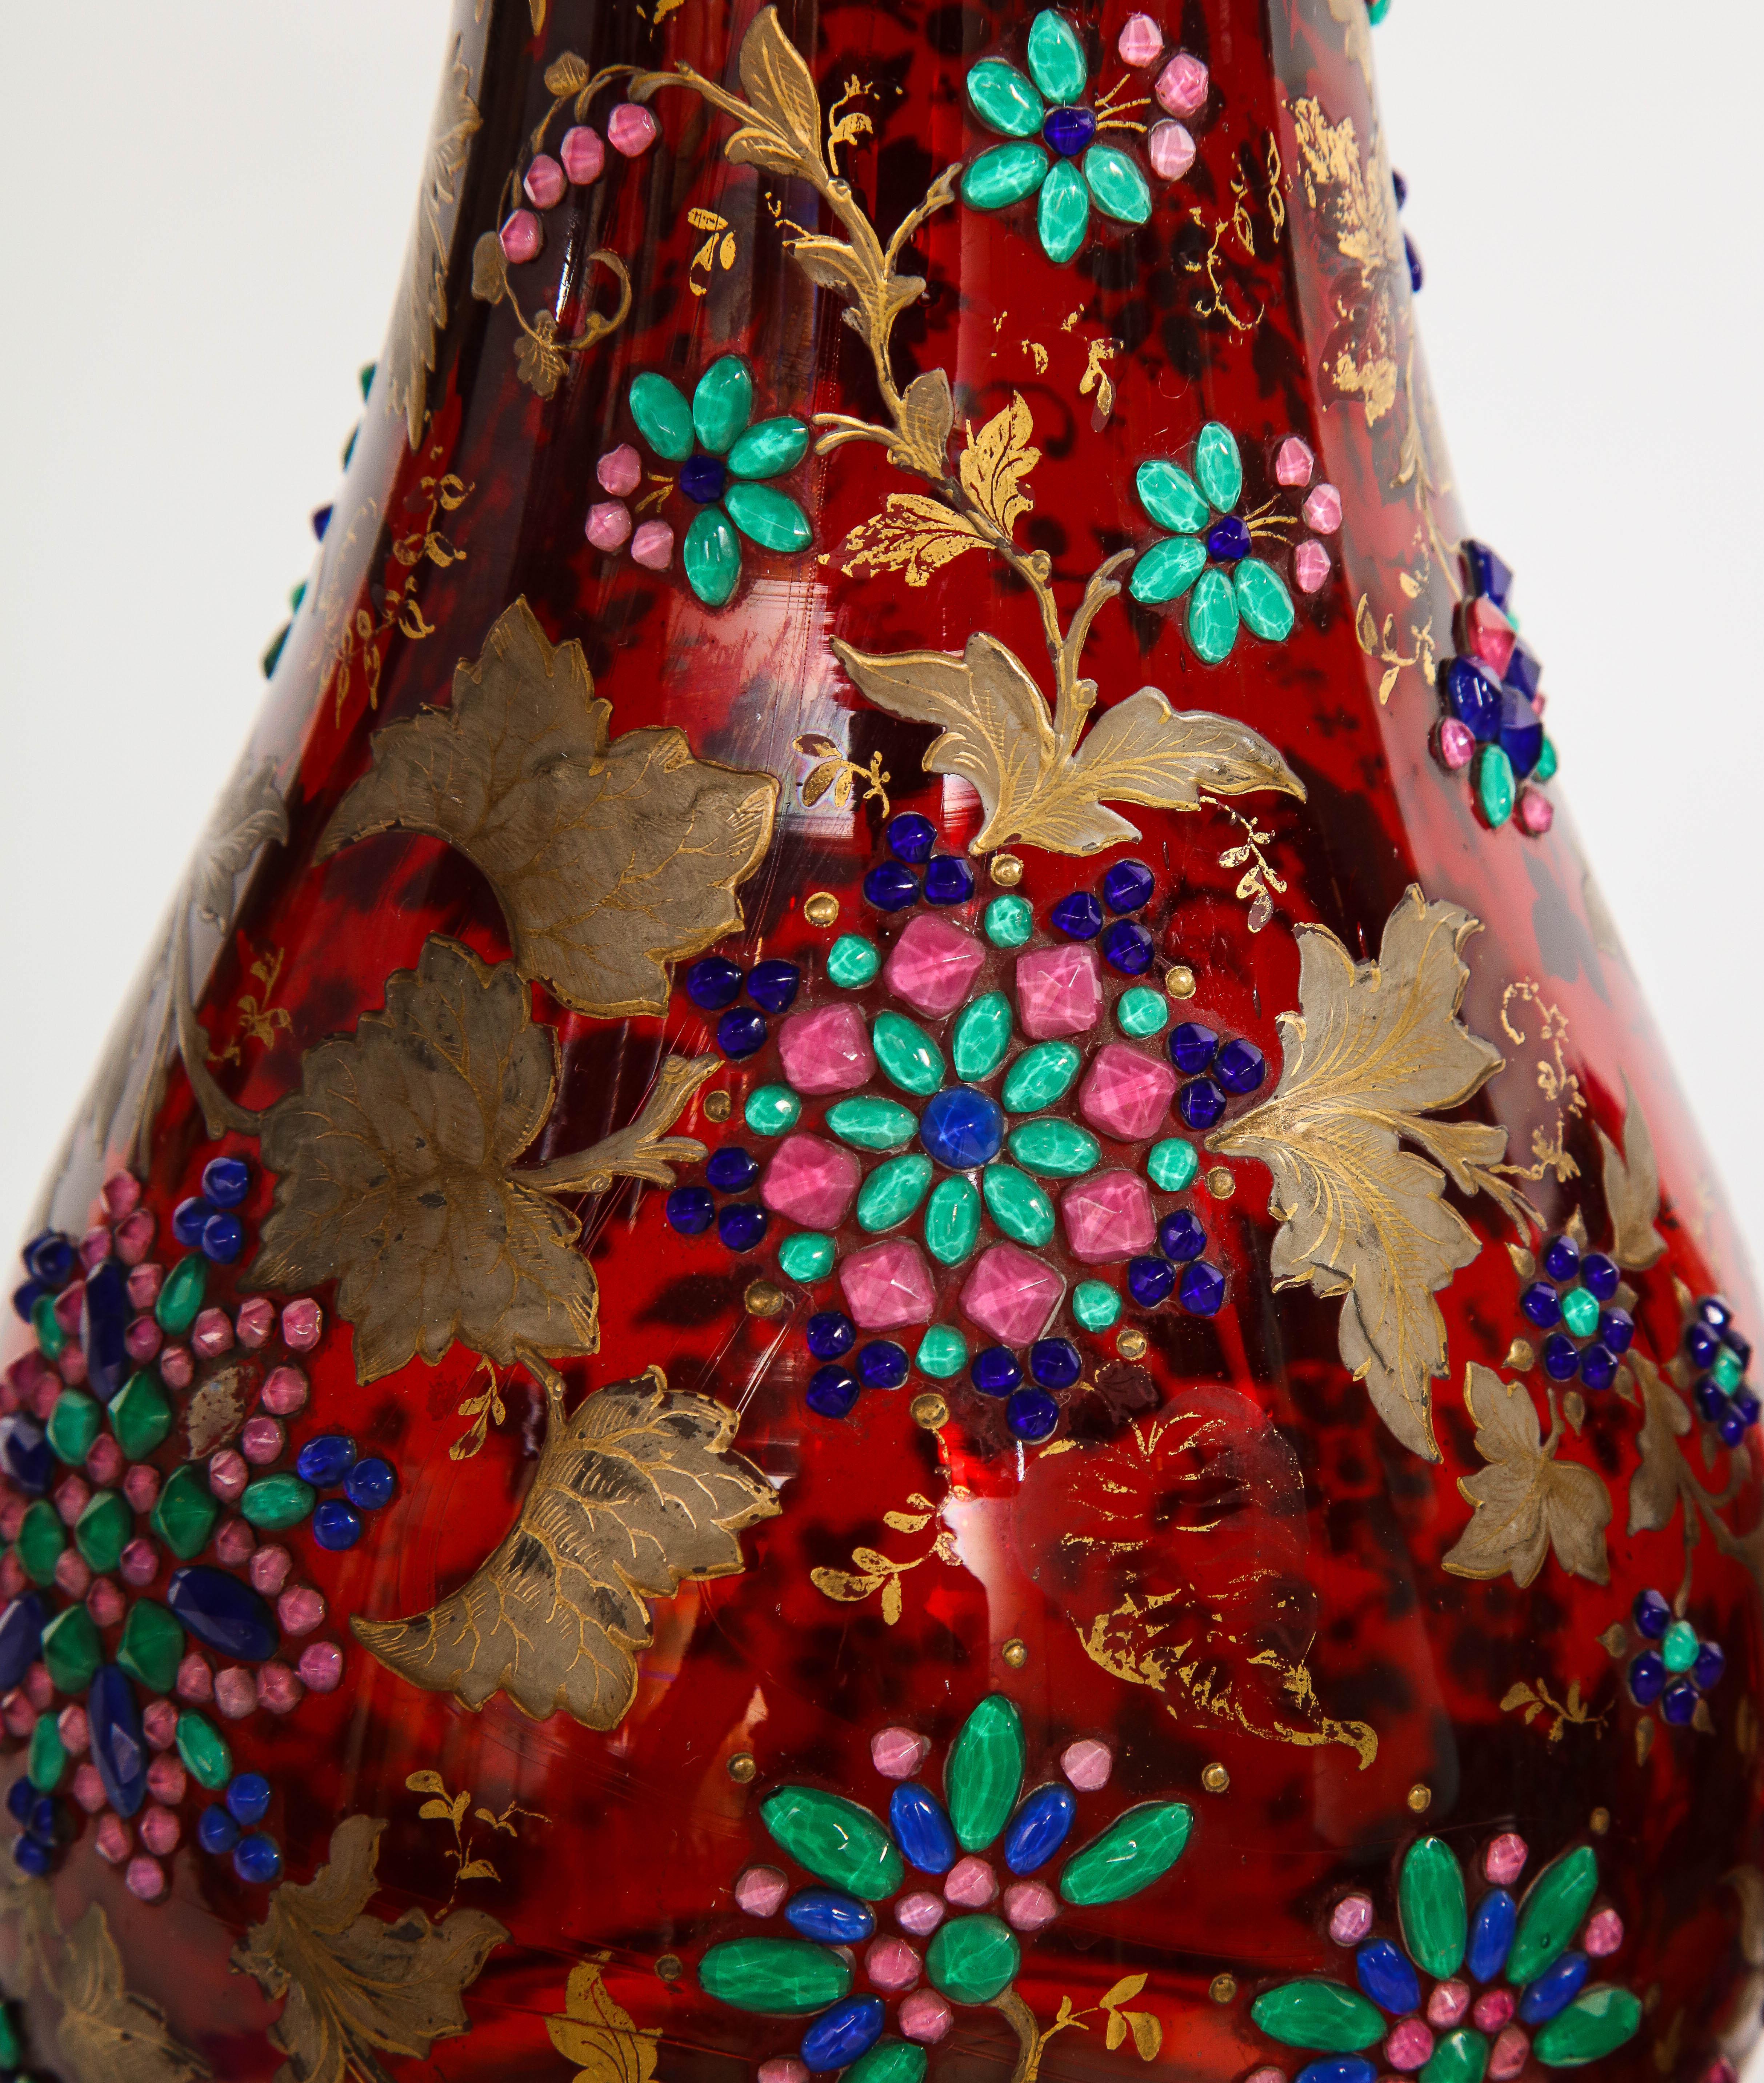 Late 19th Century Monumental Pr Moser jeweled Ruby-Red Overlay Two-Piece 24k Gold, Enameled Vases For Sale